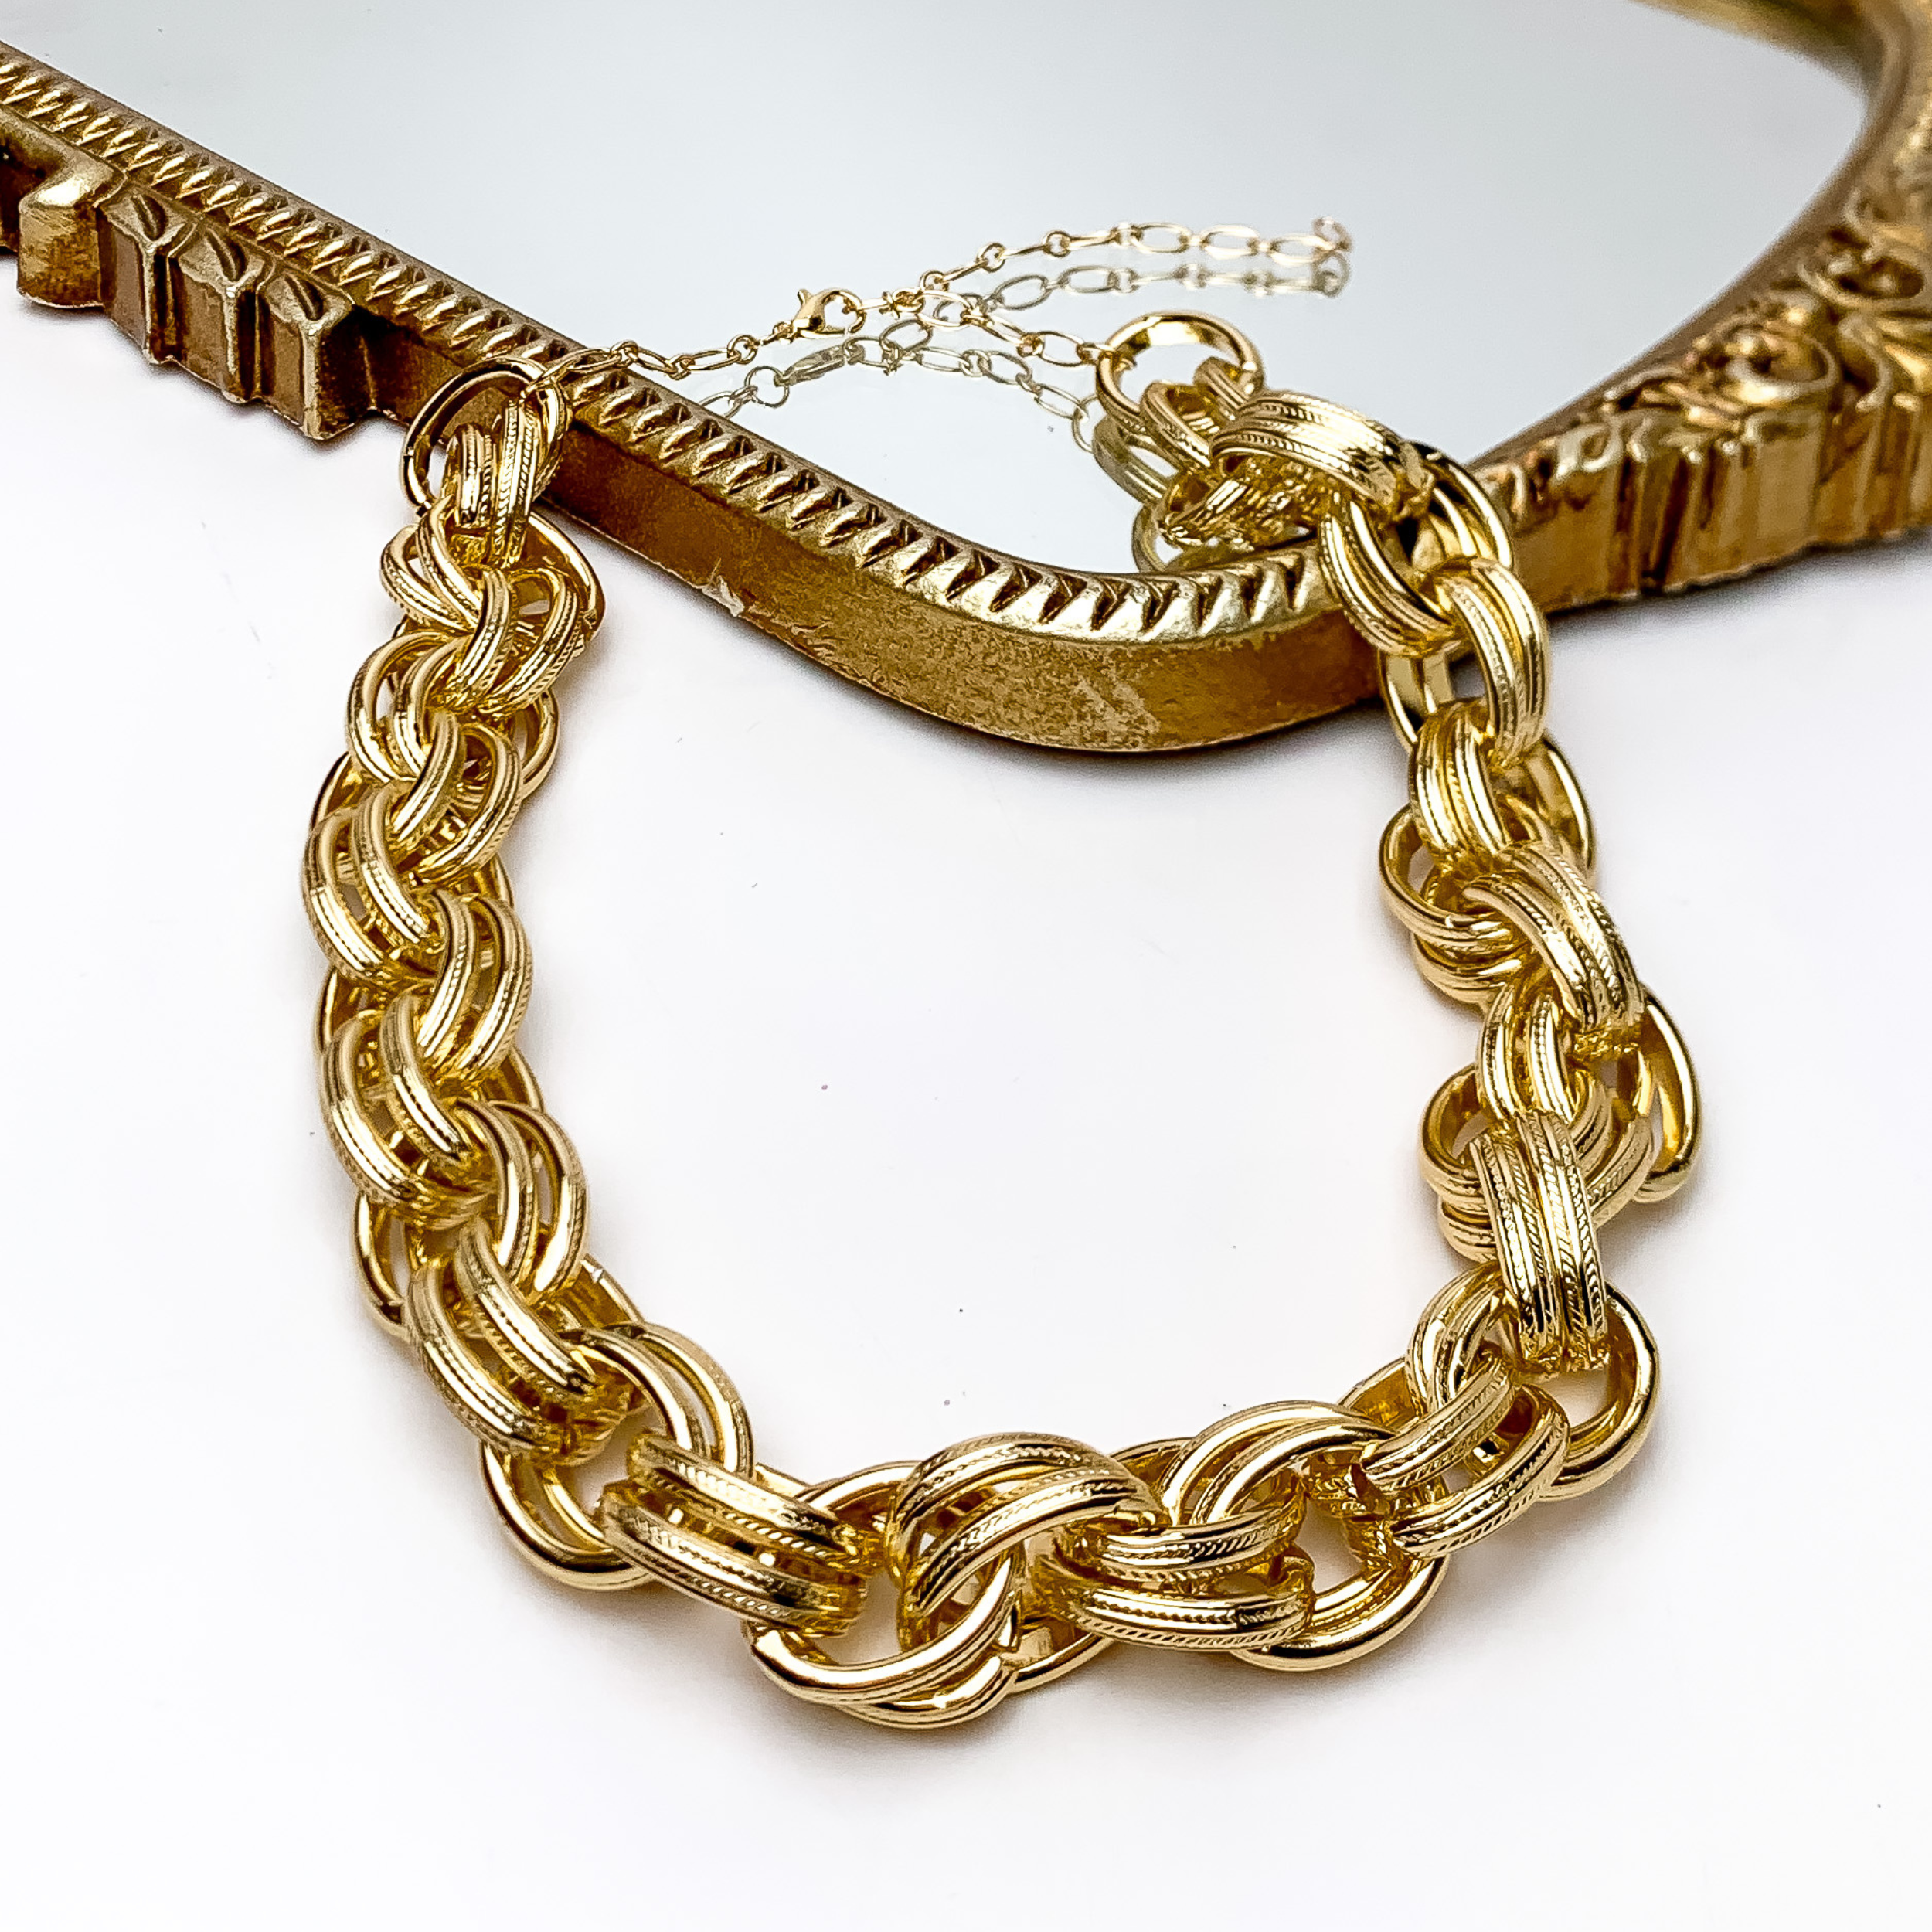 Night Out Gold Tone Chunky Chain Necklace. Pictured on a white background with part of then necklace on a gold trimmed mirror.